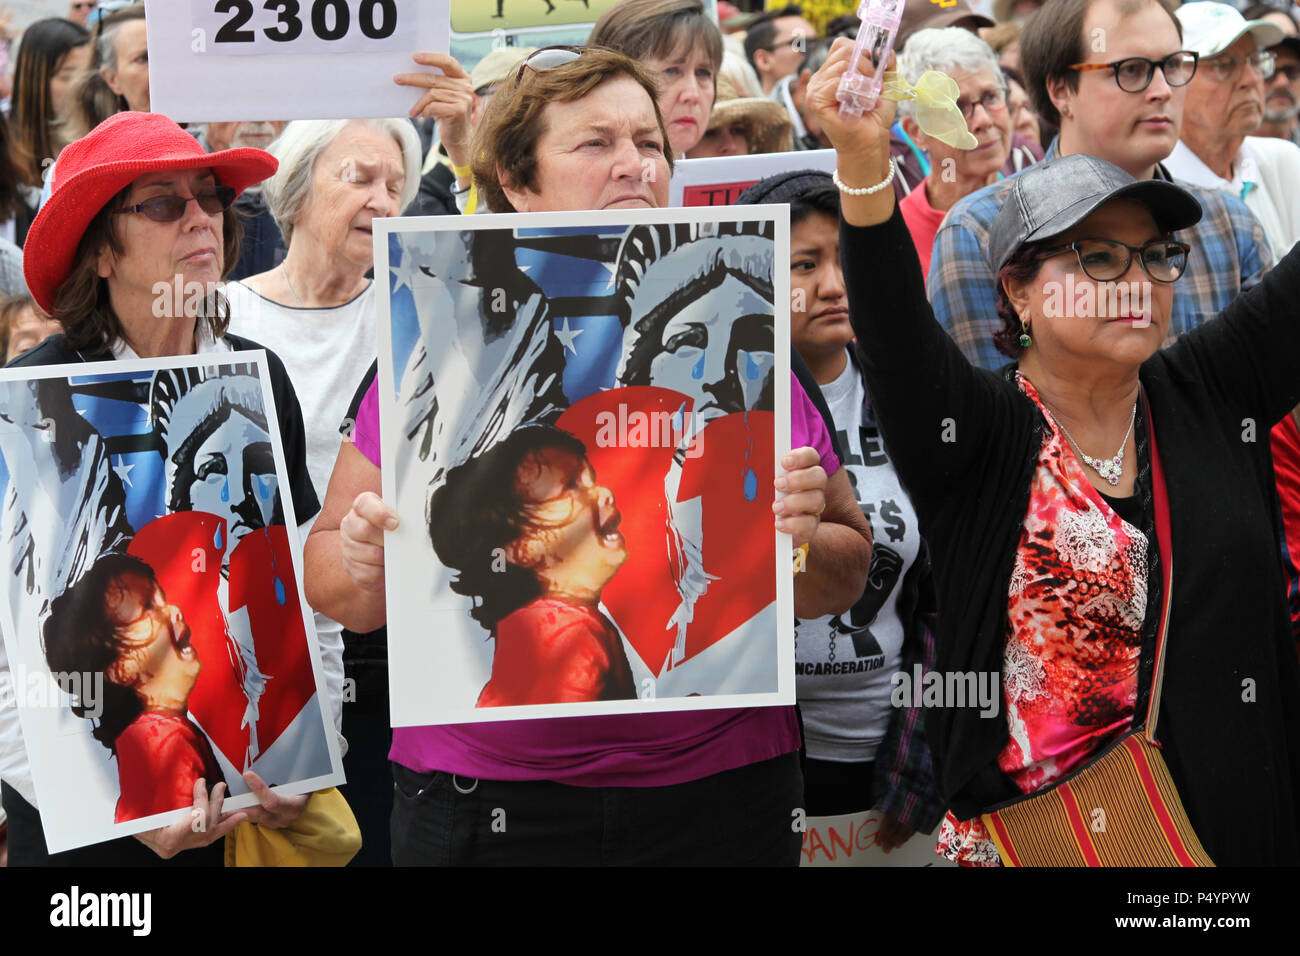 San Diego, USA. 23rd June, 2018. People take part in the 'Families Belong Together' protest in San Diego, the United States, on June 23, 2018. Thousands of people marched in protest in the U.S.-Mexico border city of San Diego on Saturday, raising slogans against the Trump administration's policy of separating children from immigrant parents. Credit: Gao Shan/Xinhua/Alamy Live News Stock Photo